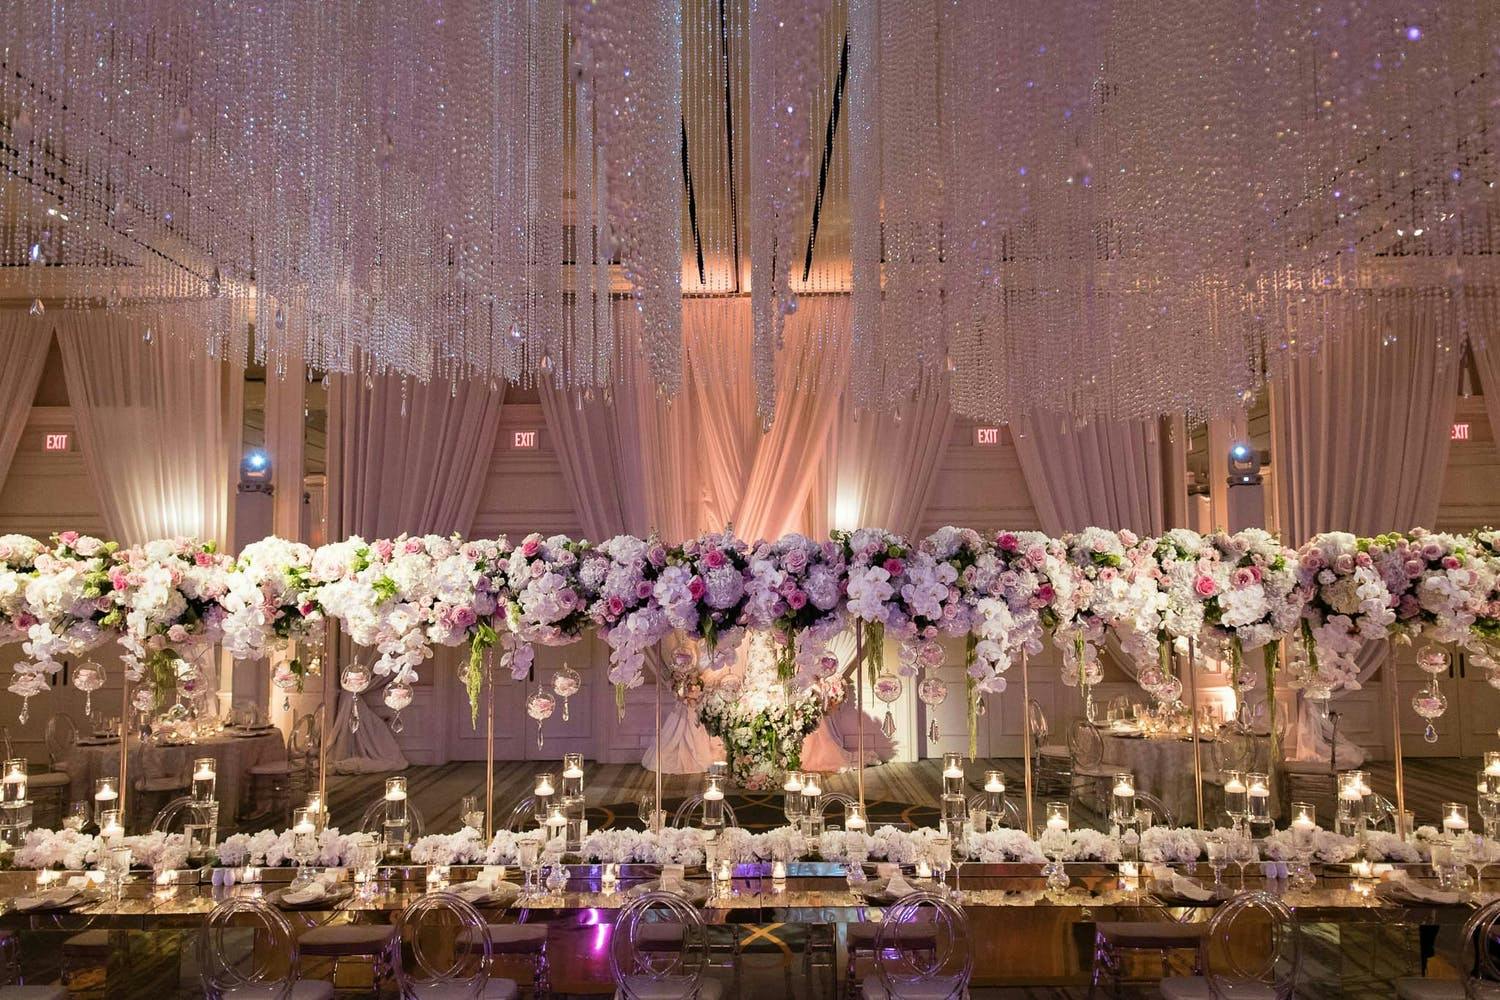 Ballroom Wedding Reception With Elevated White and Purple Floral Centerpieces and Suspended Crystal Wedding Ceiling Decorations | PartySlate